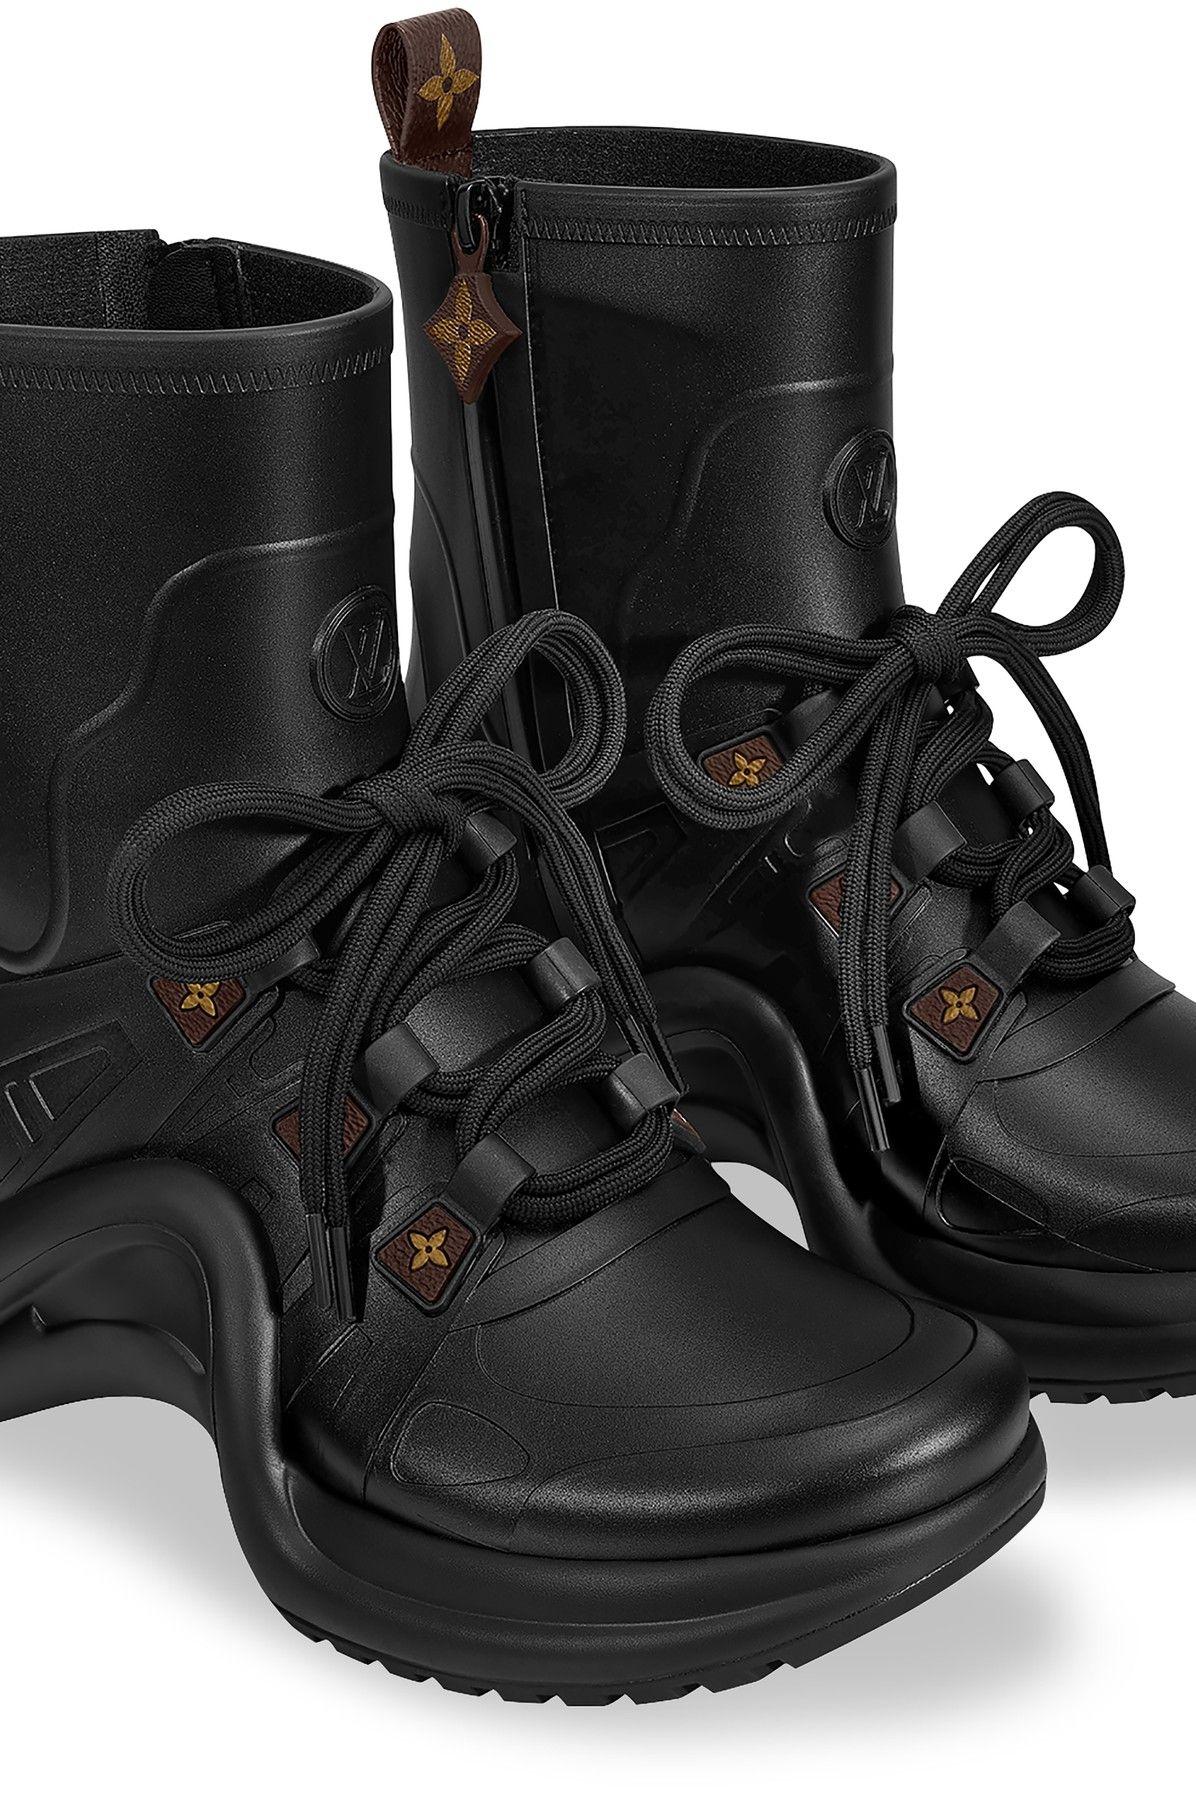 Sell Louis Vuitton Archlight Sneaker Boots - Black/Silver/White